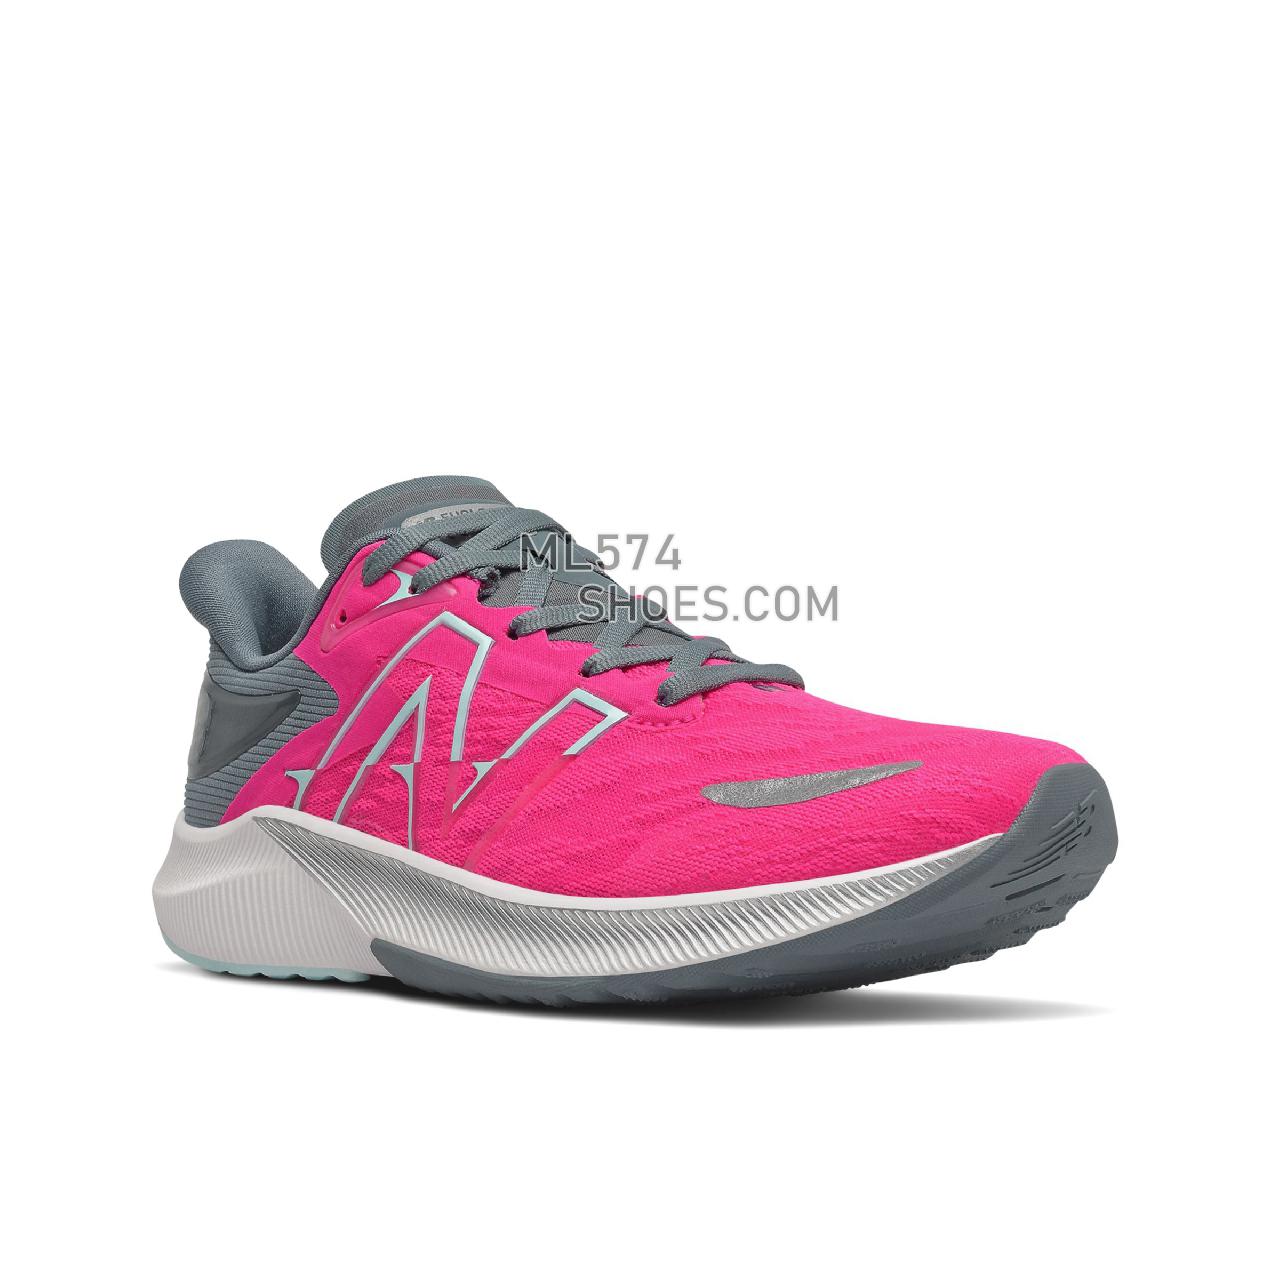 New Balance FuelCell Propel v3 - Women's Neutral Running - Pink Glo with Deep Ocean Grey - WFCPRLP3